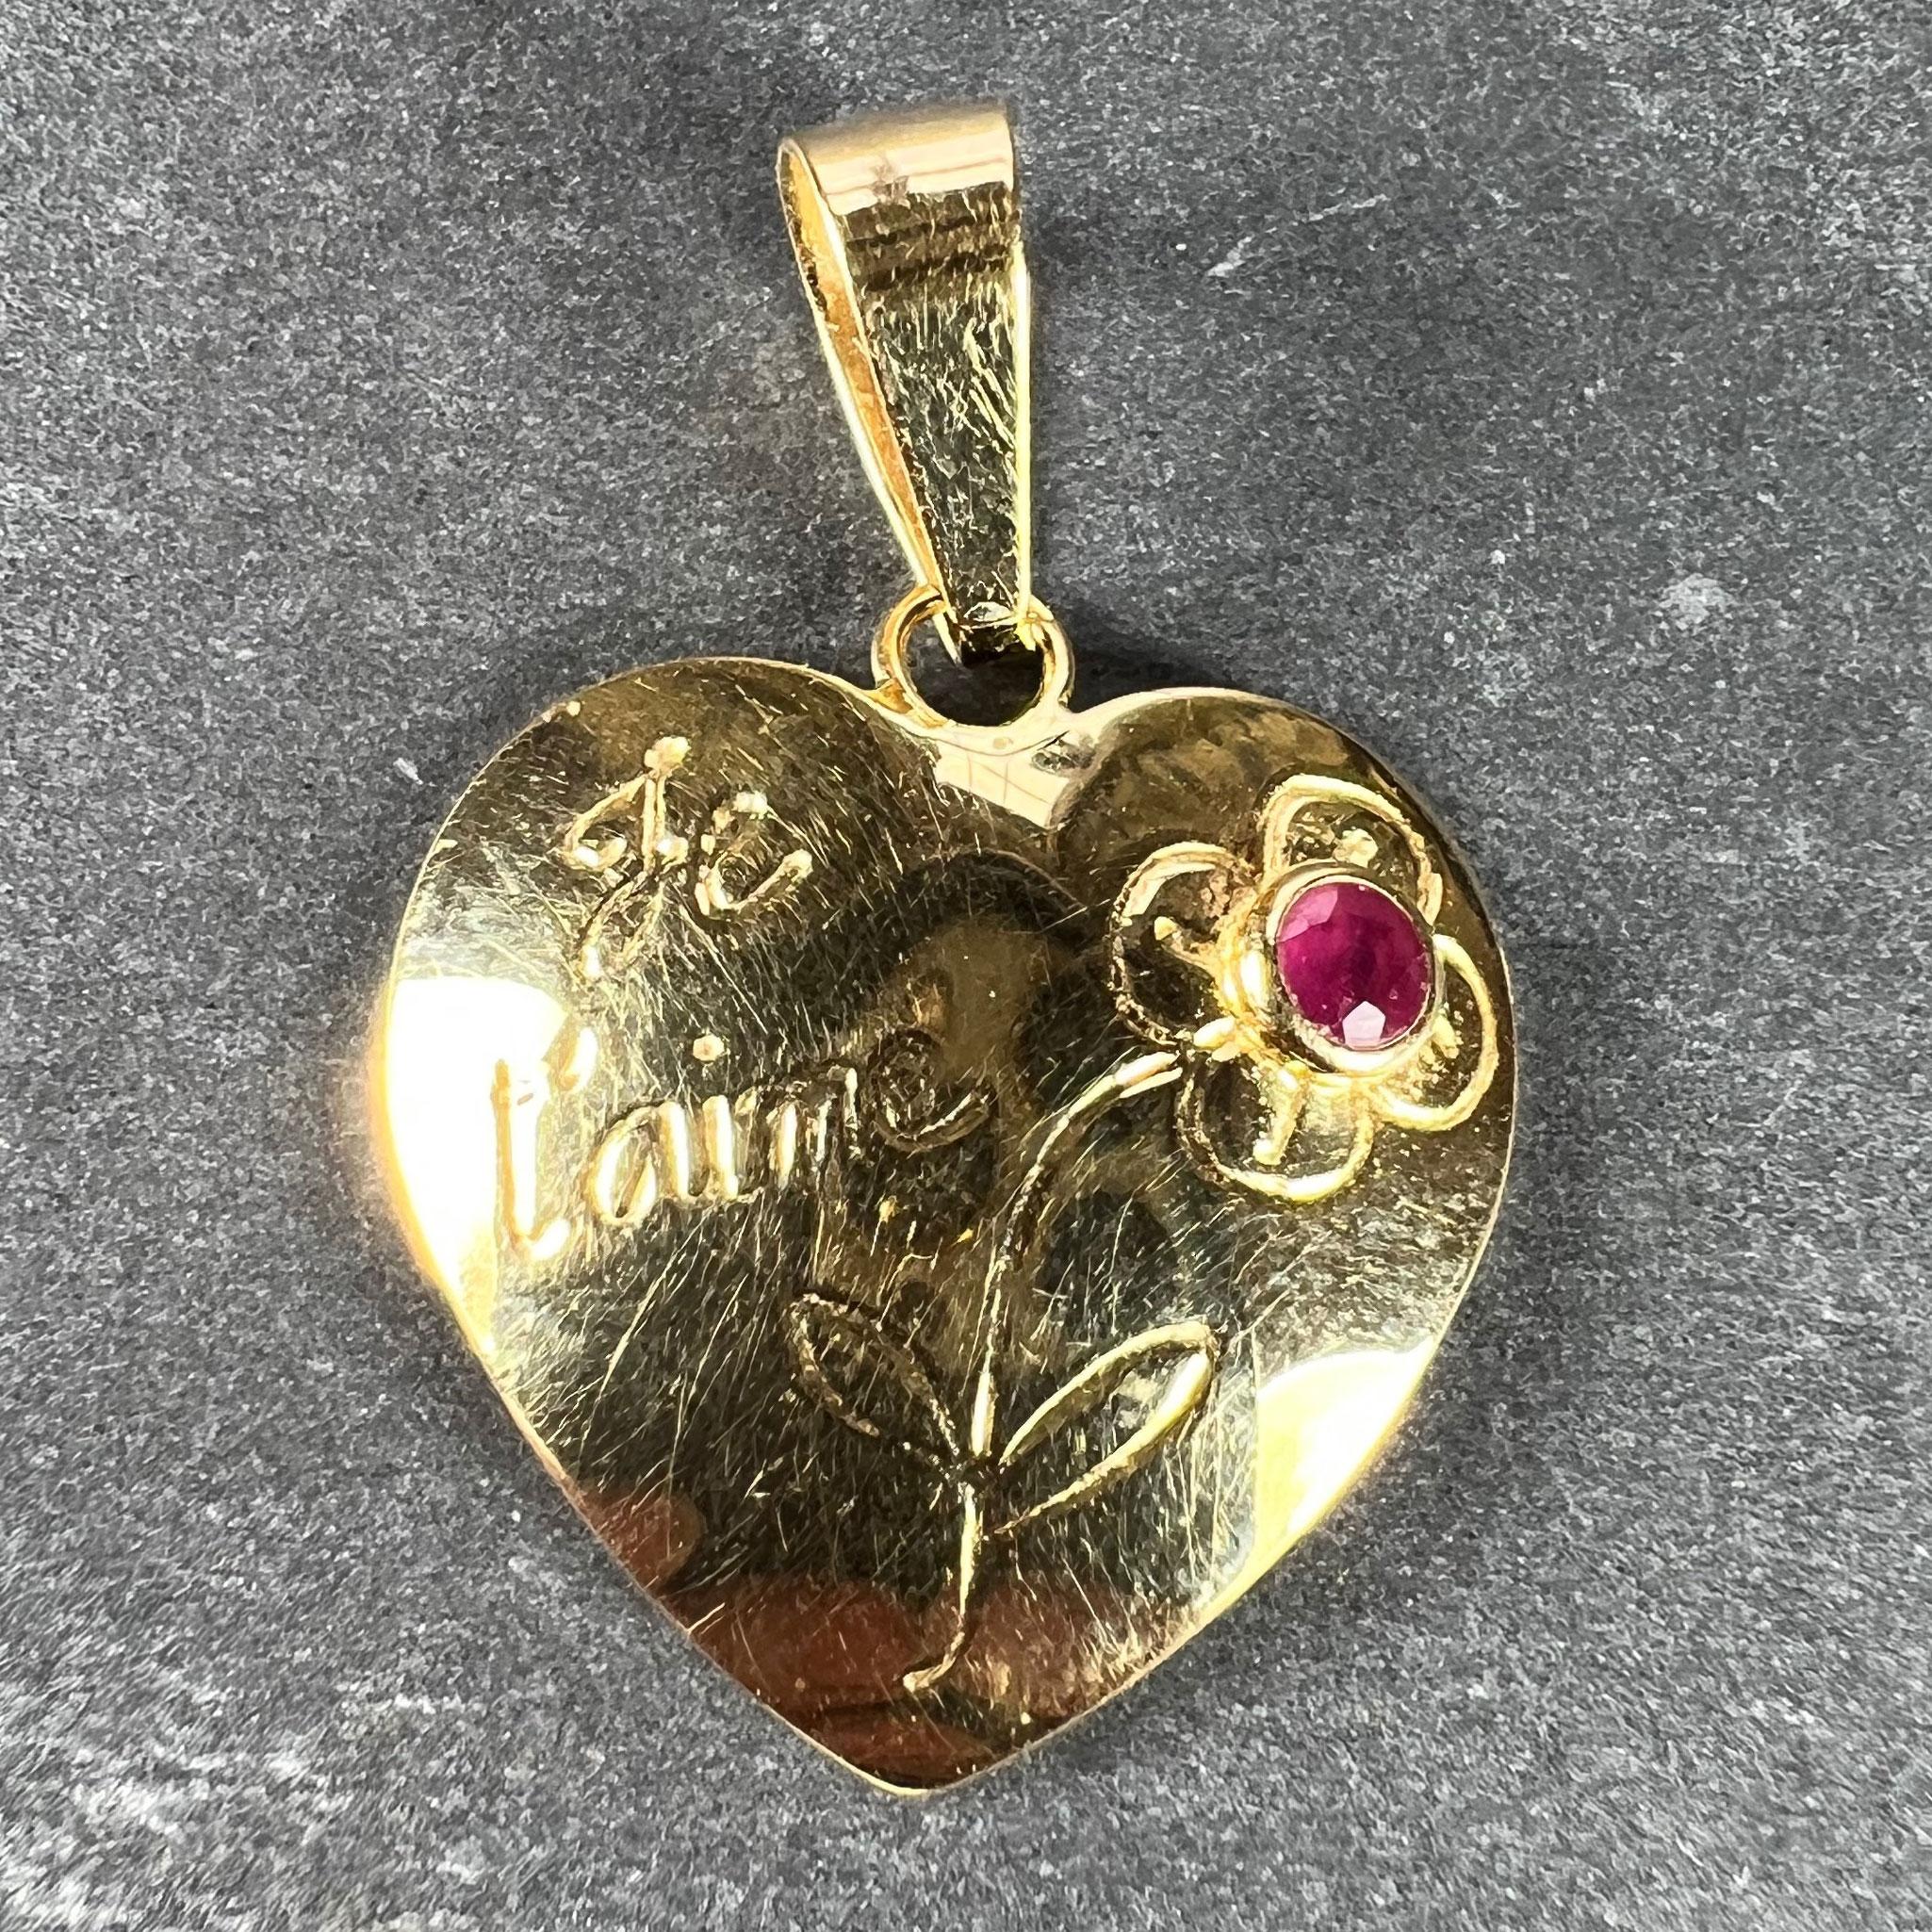 A French 18 karat (18K) yellow gold love letter charm pendant designed as a convex heart with an engraved flower set with a natural untreated ruby weighing approximately 0.10 carats and the words 'Je t'aime' in cursive to one side. 

Stamped with an